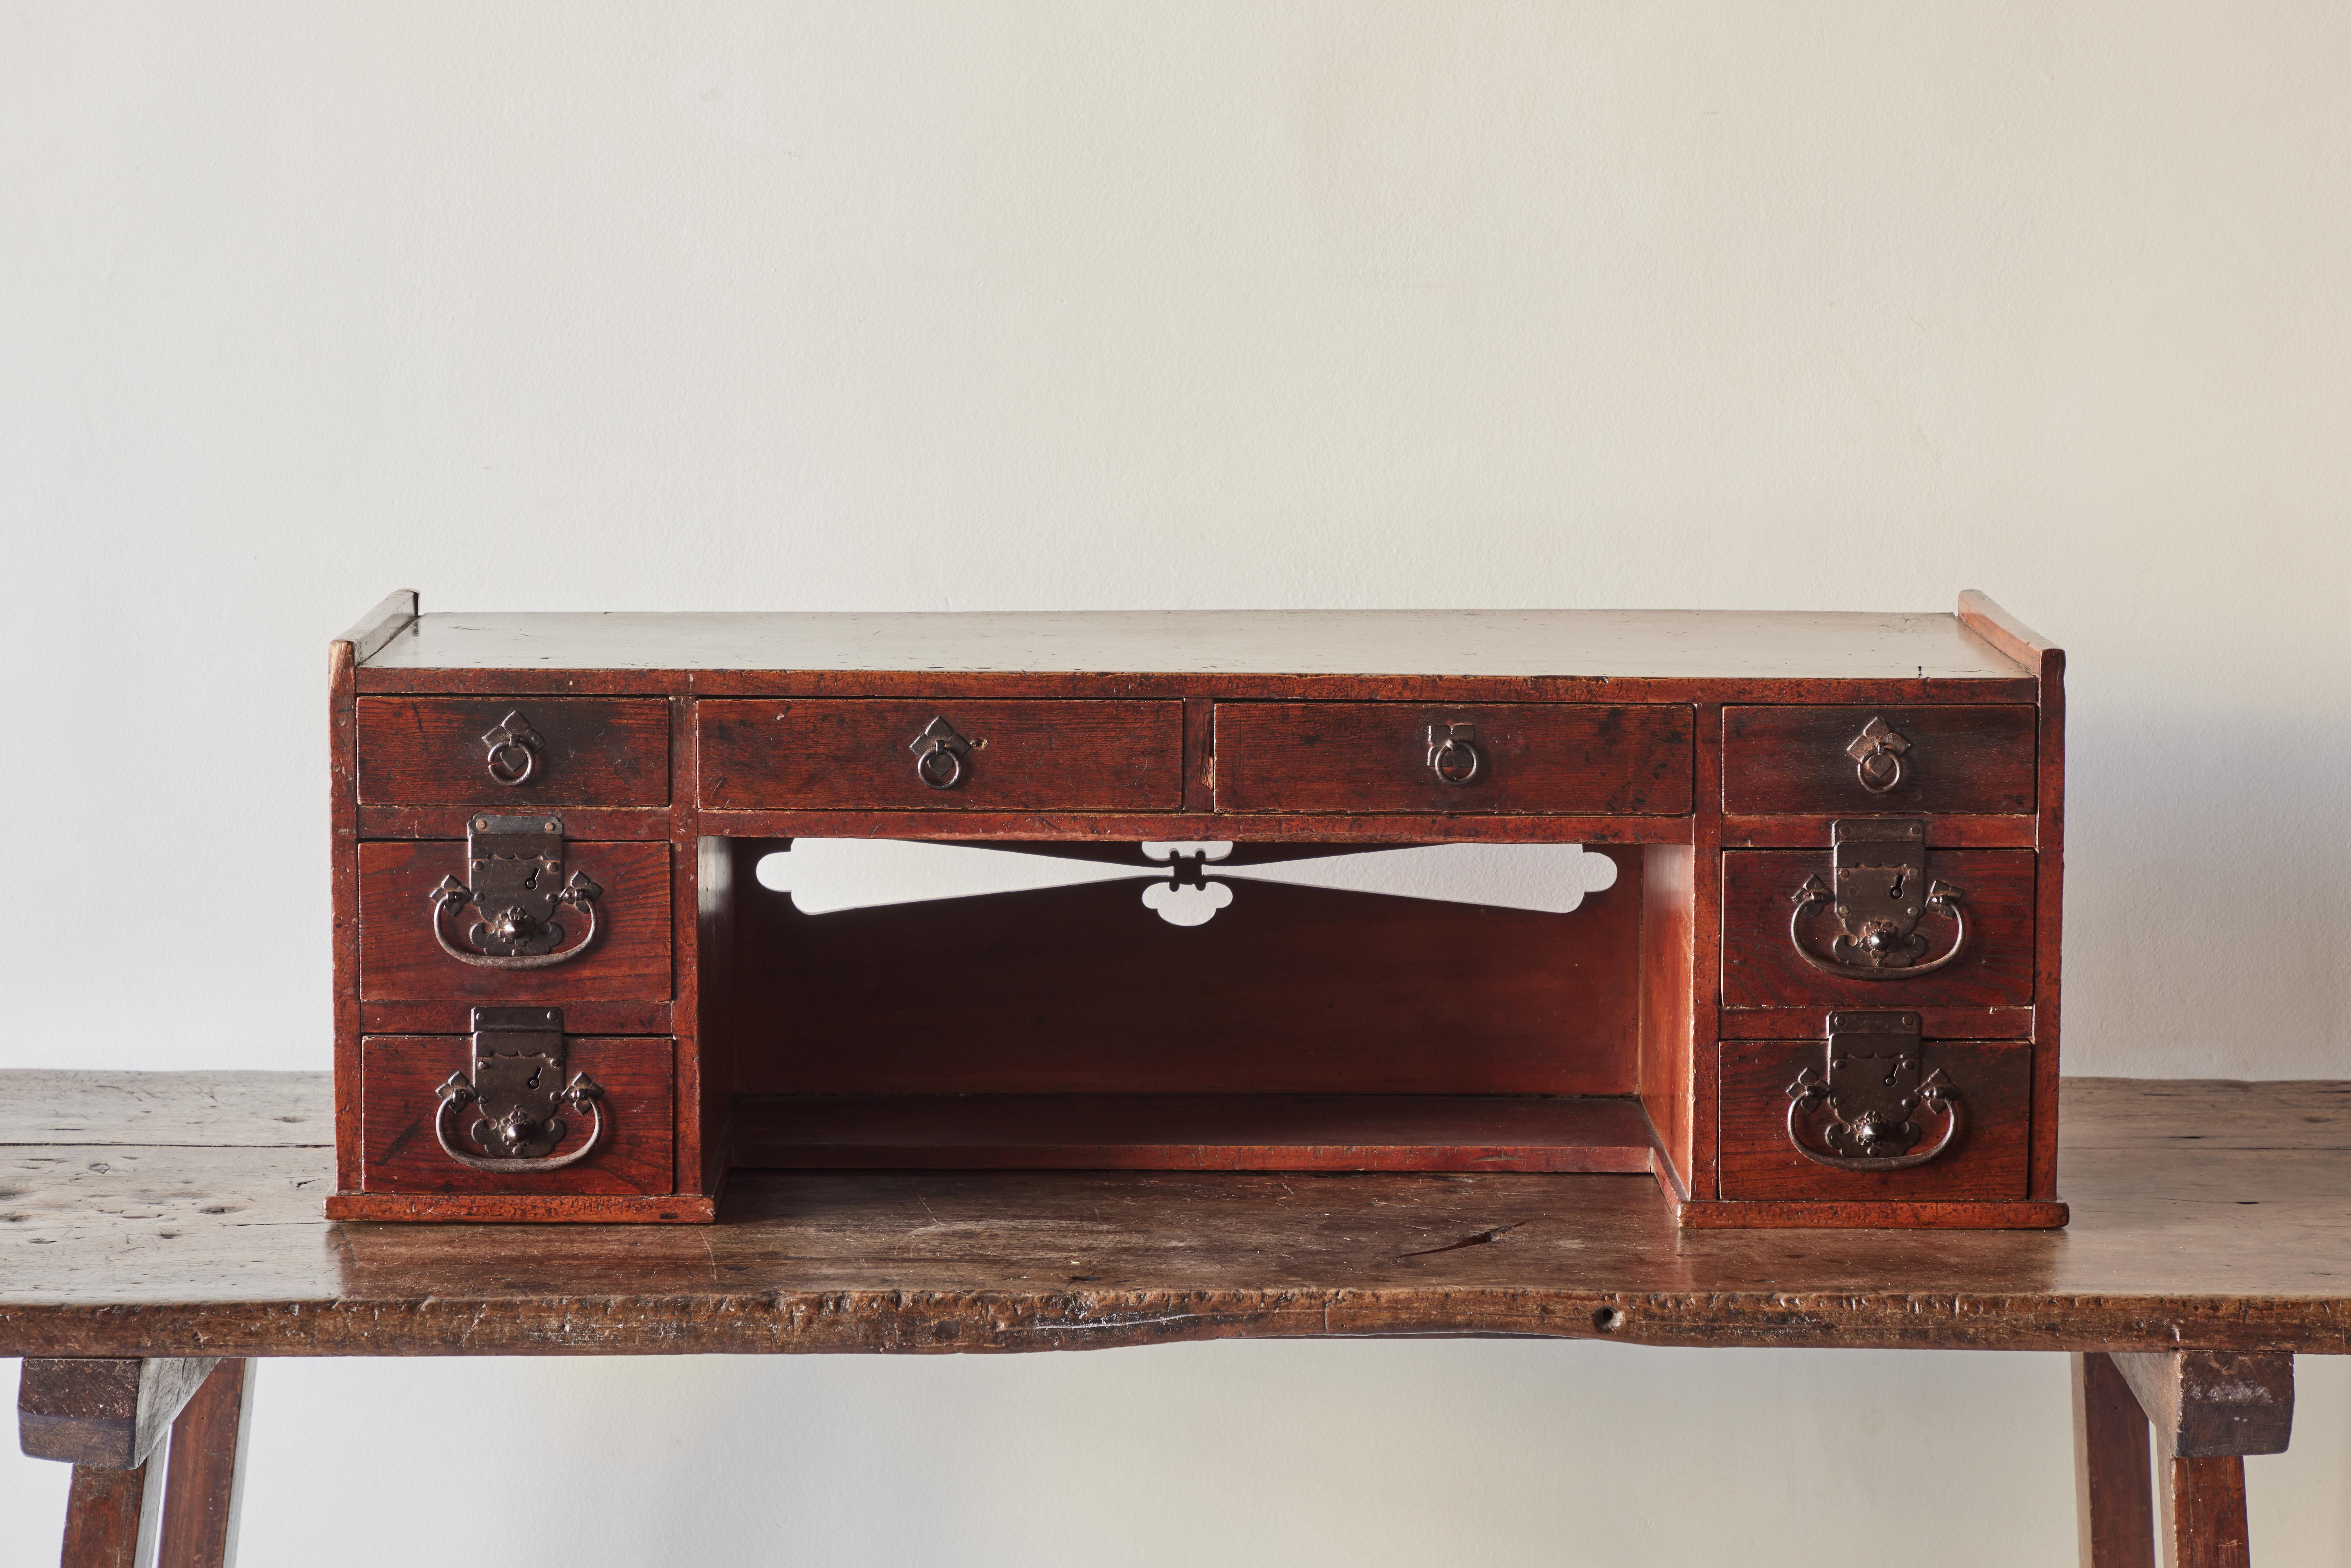 Low Japanese merchant’s desk from the Meiji Period (1868-1912). Made of solid wood and iron hardware, this low desk features eight small drawers for ample storage.